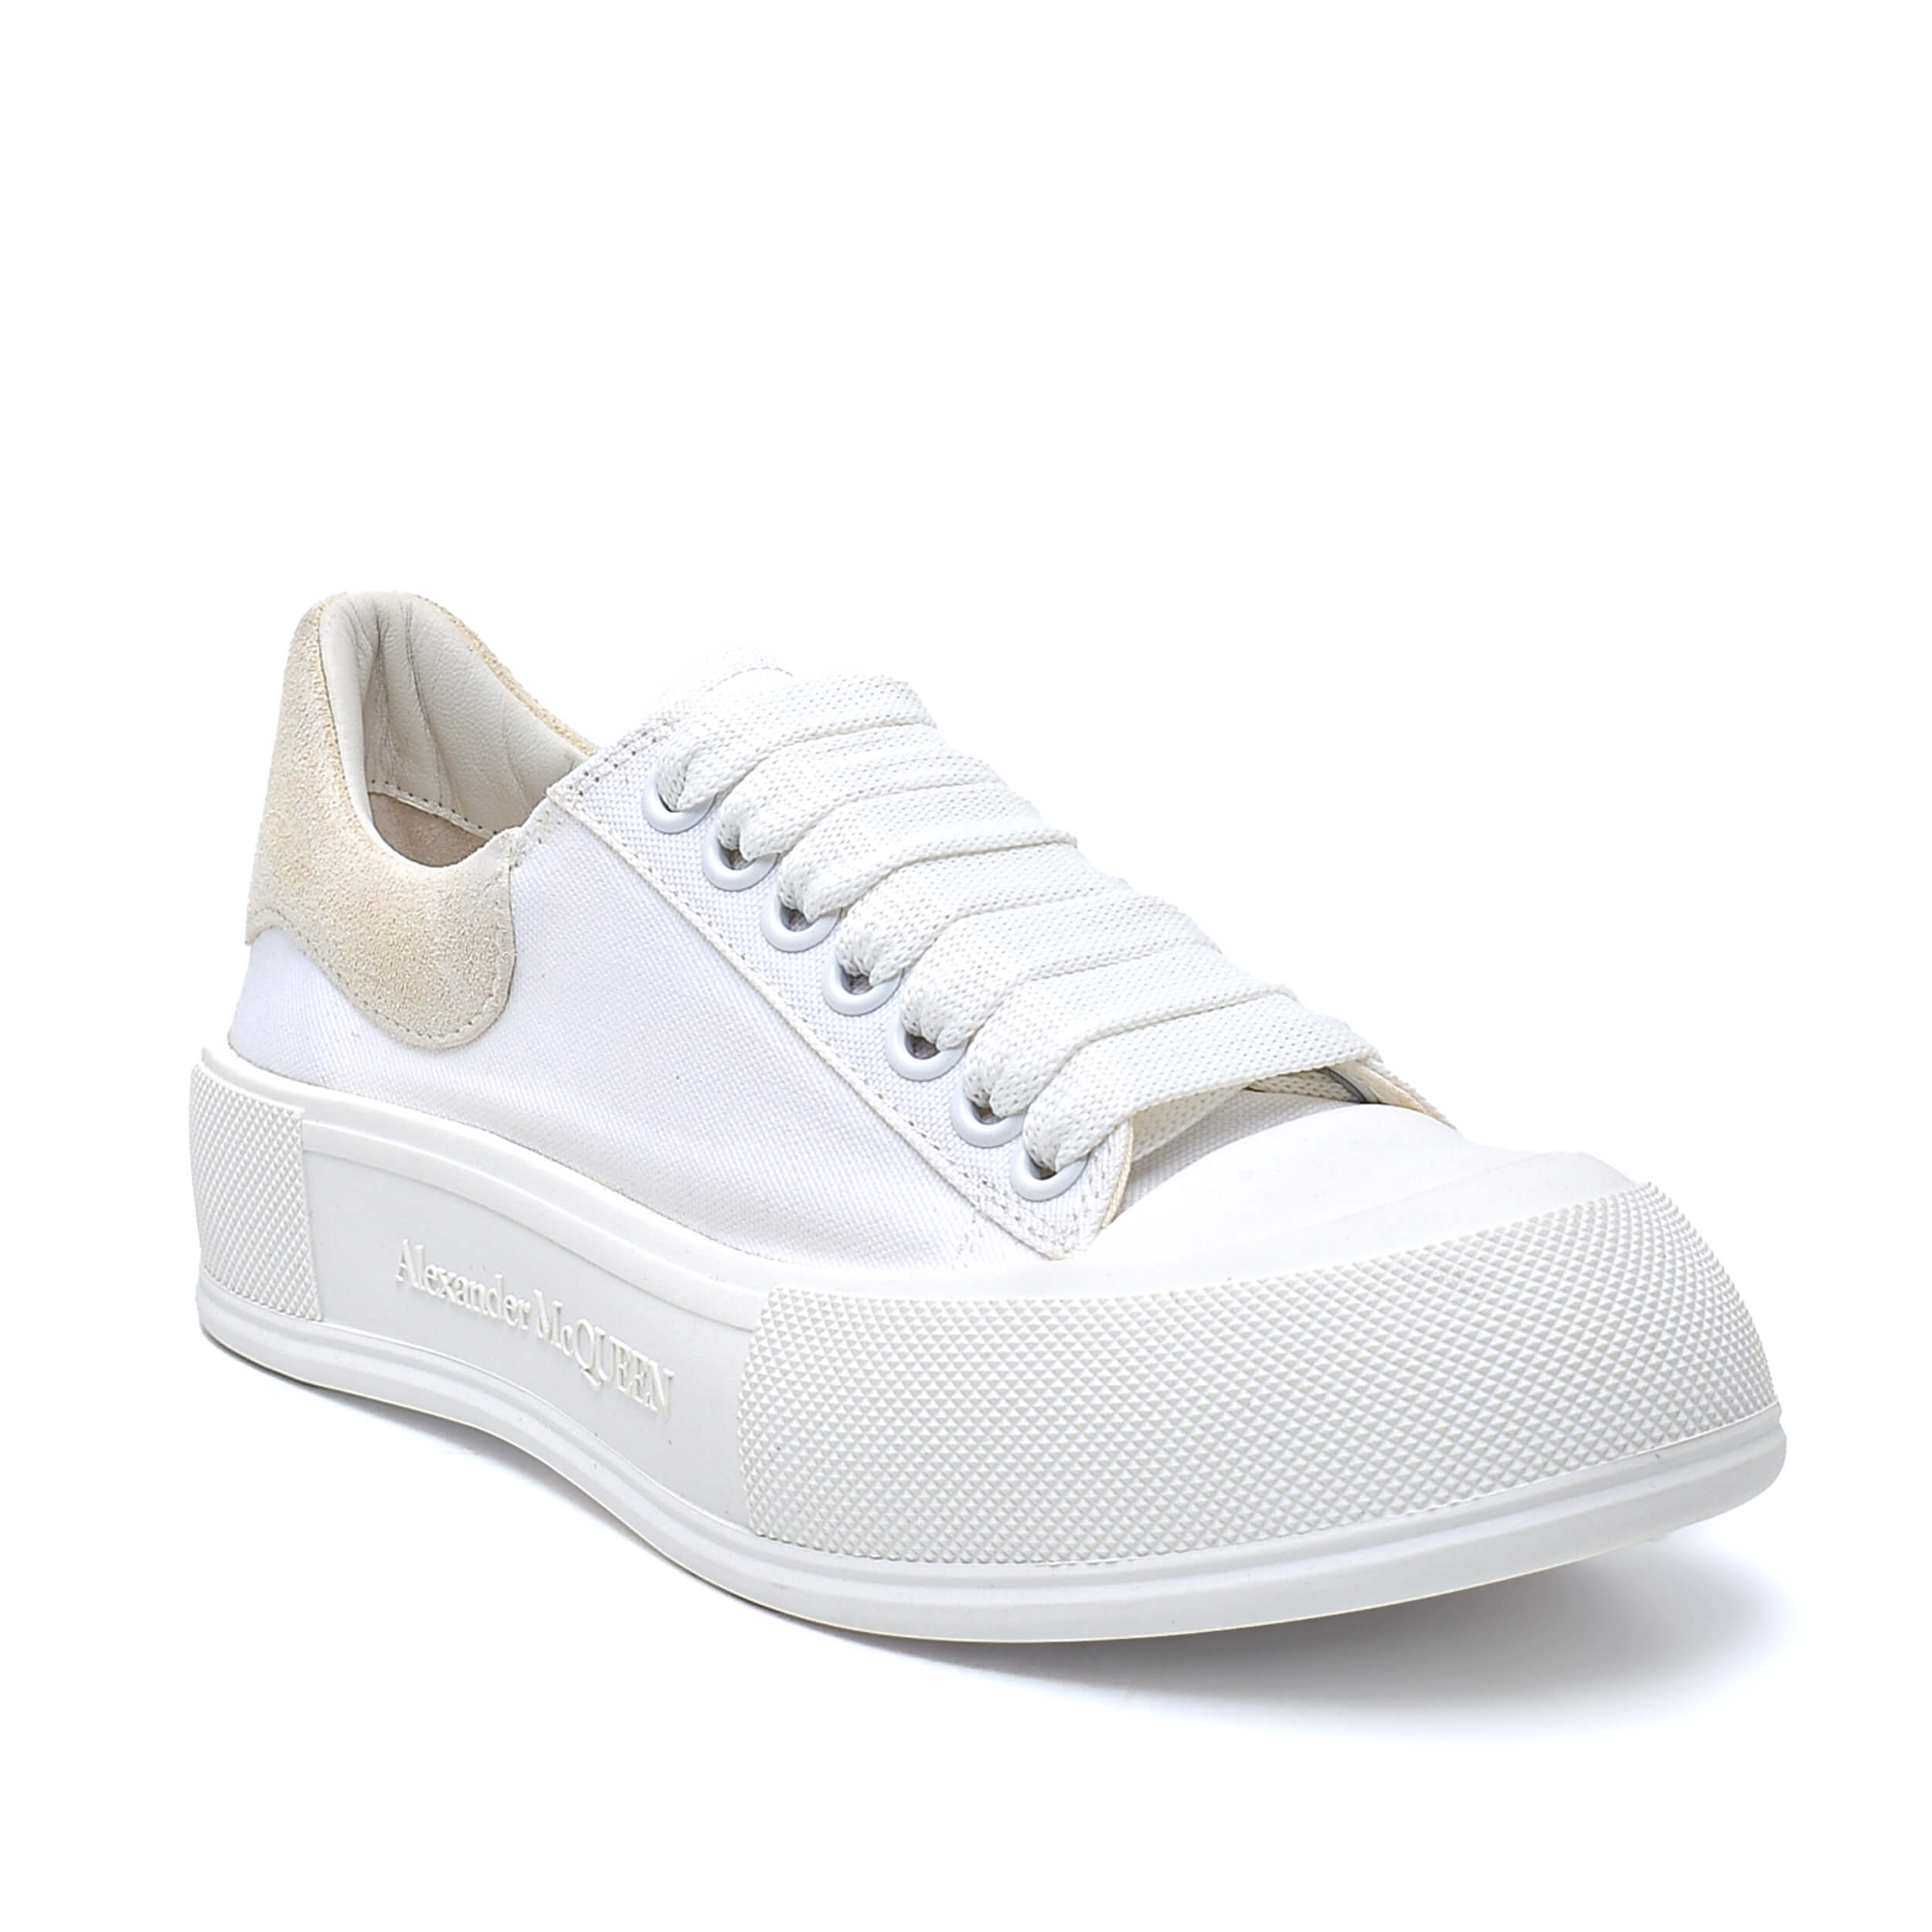 Alexander McQueen - White Canvas Lace Sneakers / 38